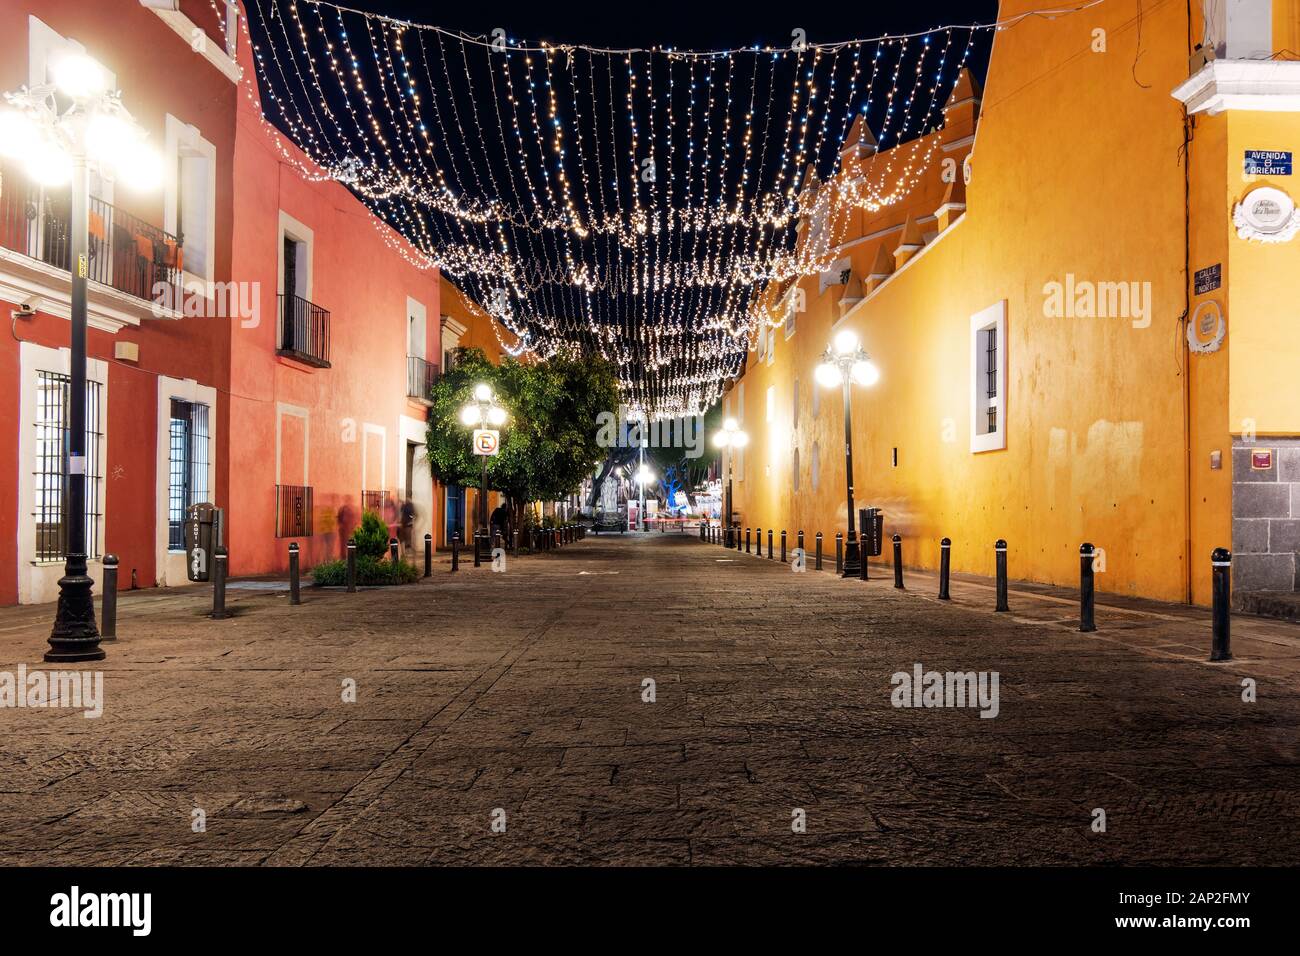 Puebla de Zaragoza, Mexico, October 15, 2018 - Calle 8 Norte street of Puebla city with light decoration without cars and people at night Stock Photo